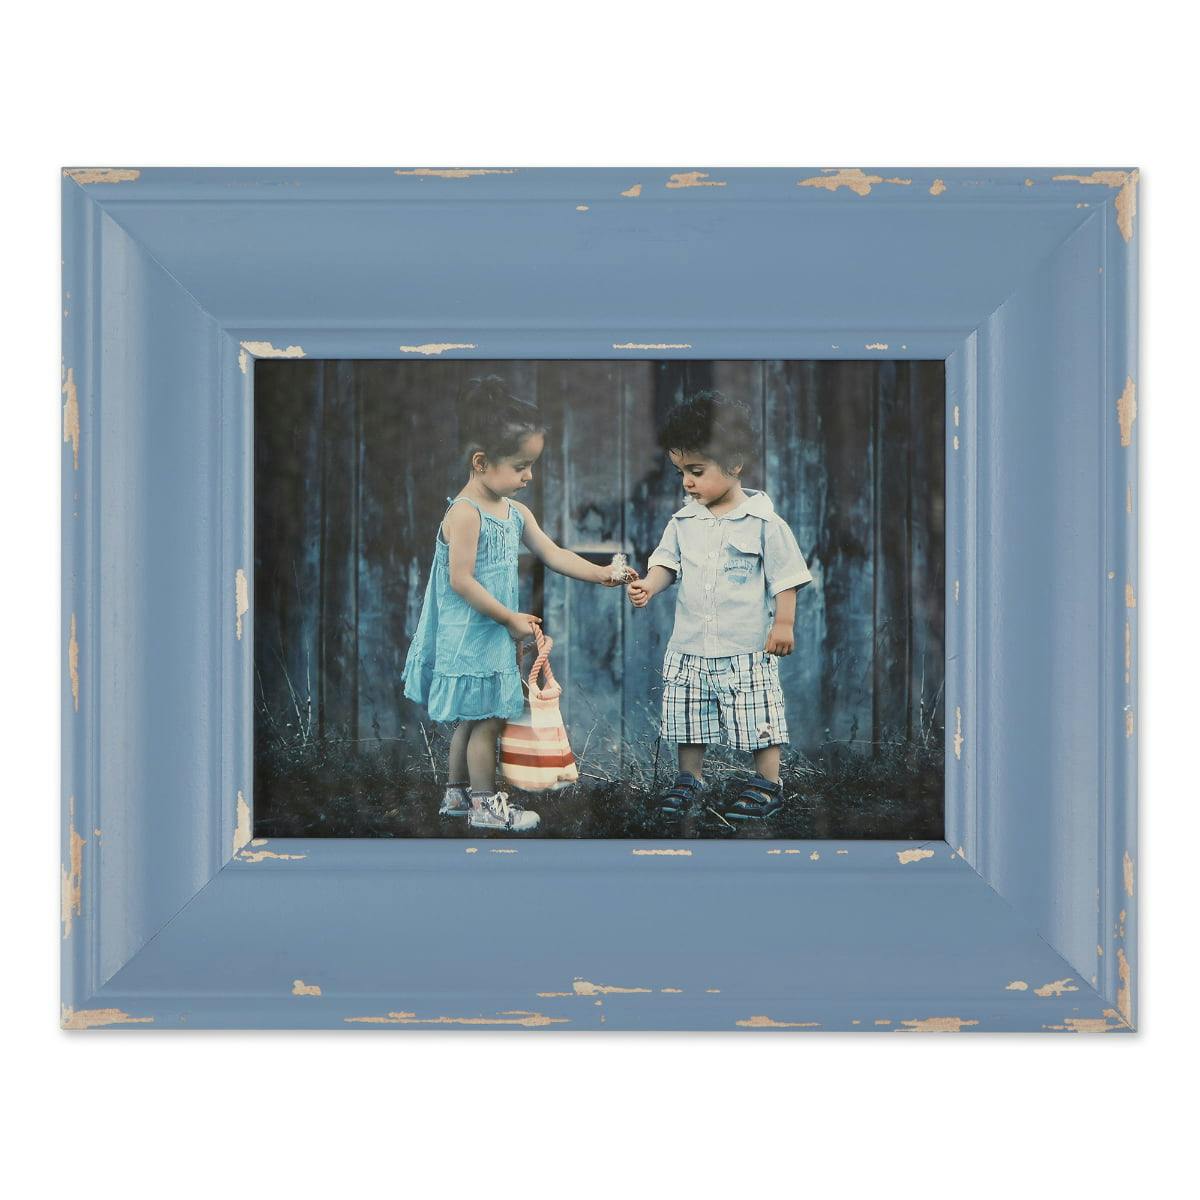 Antique Distressed Blue Wood 5x7 Photo Frame with Glass